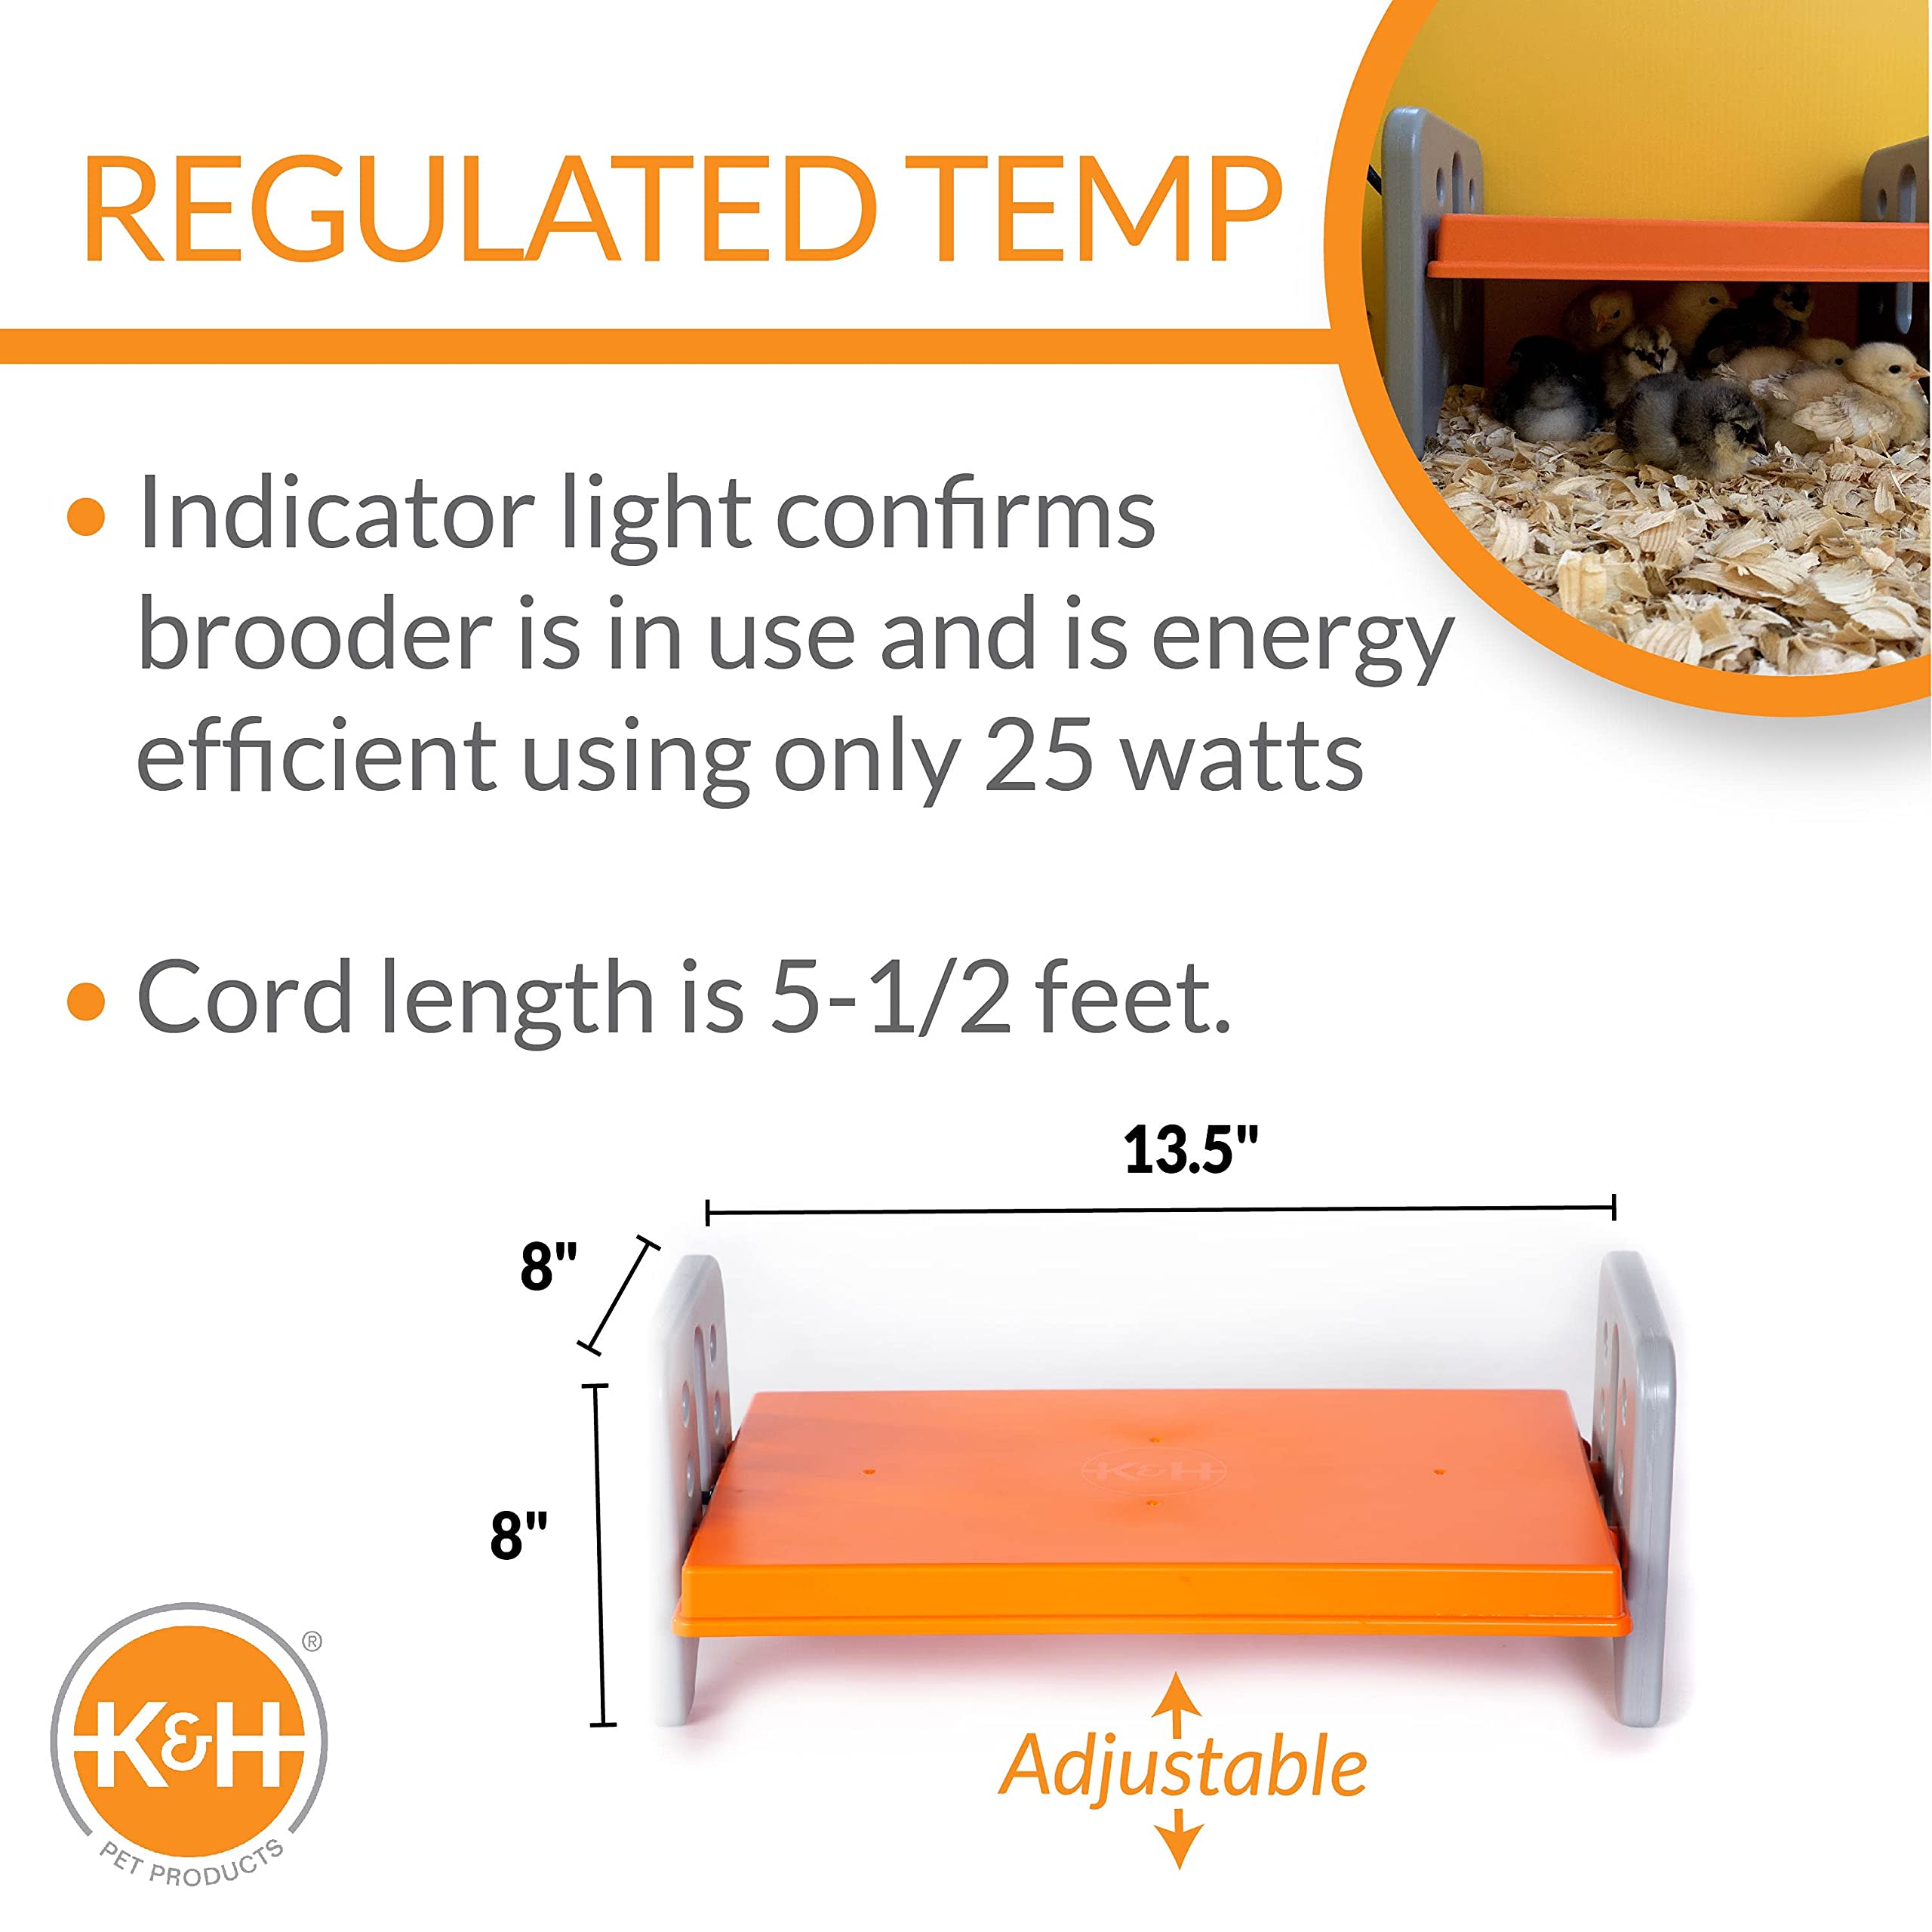 K&H Pet Products Thermo Chicken Brooder, Brooder Heater for Chicks, Chick Brooder Plate, Safe Alternative to Heat Lamp for Chickens - Gray/Orange Small 8 X 13.5 X 8 Inches